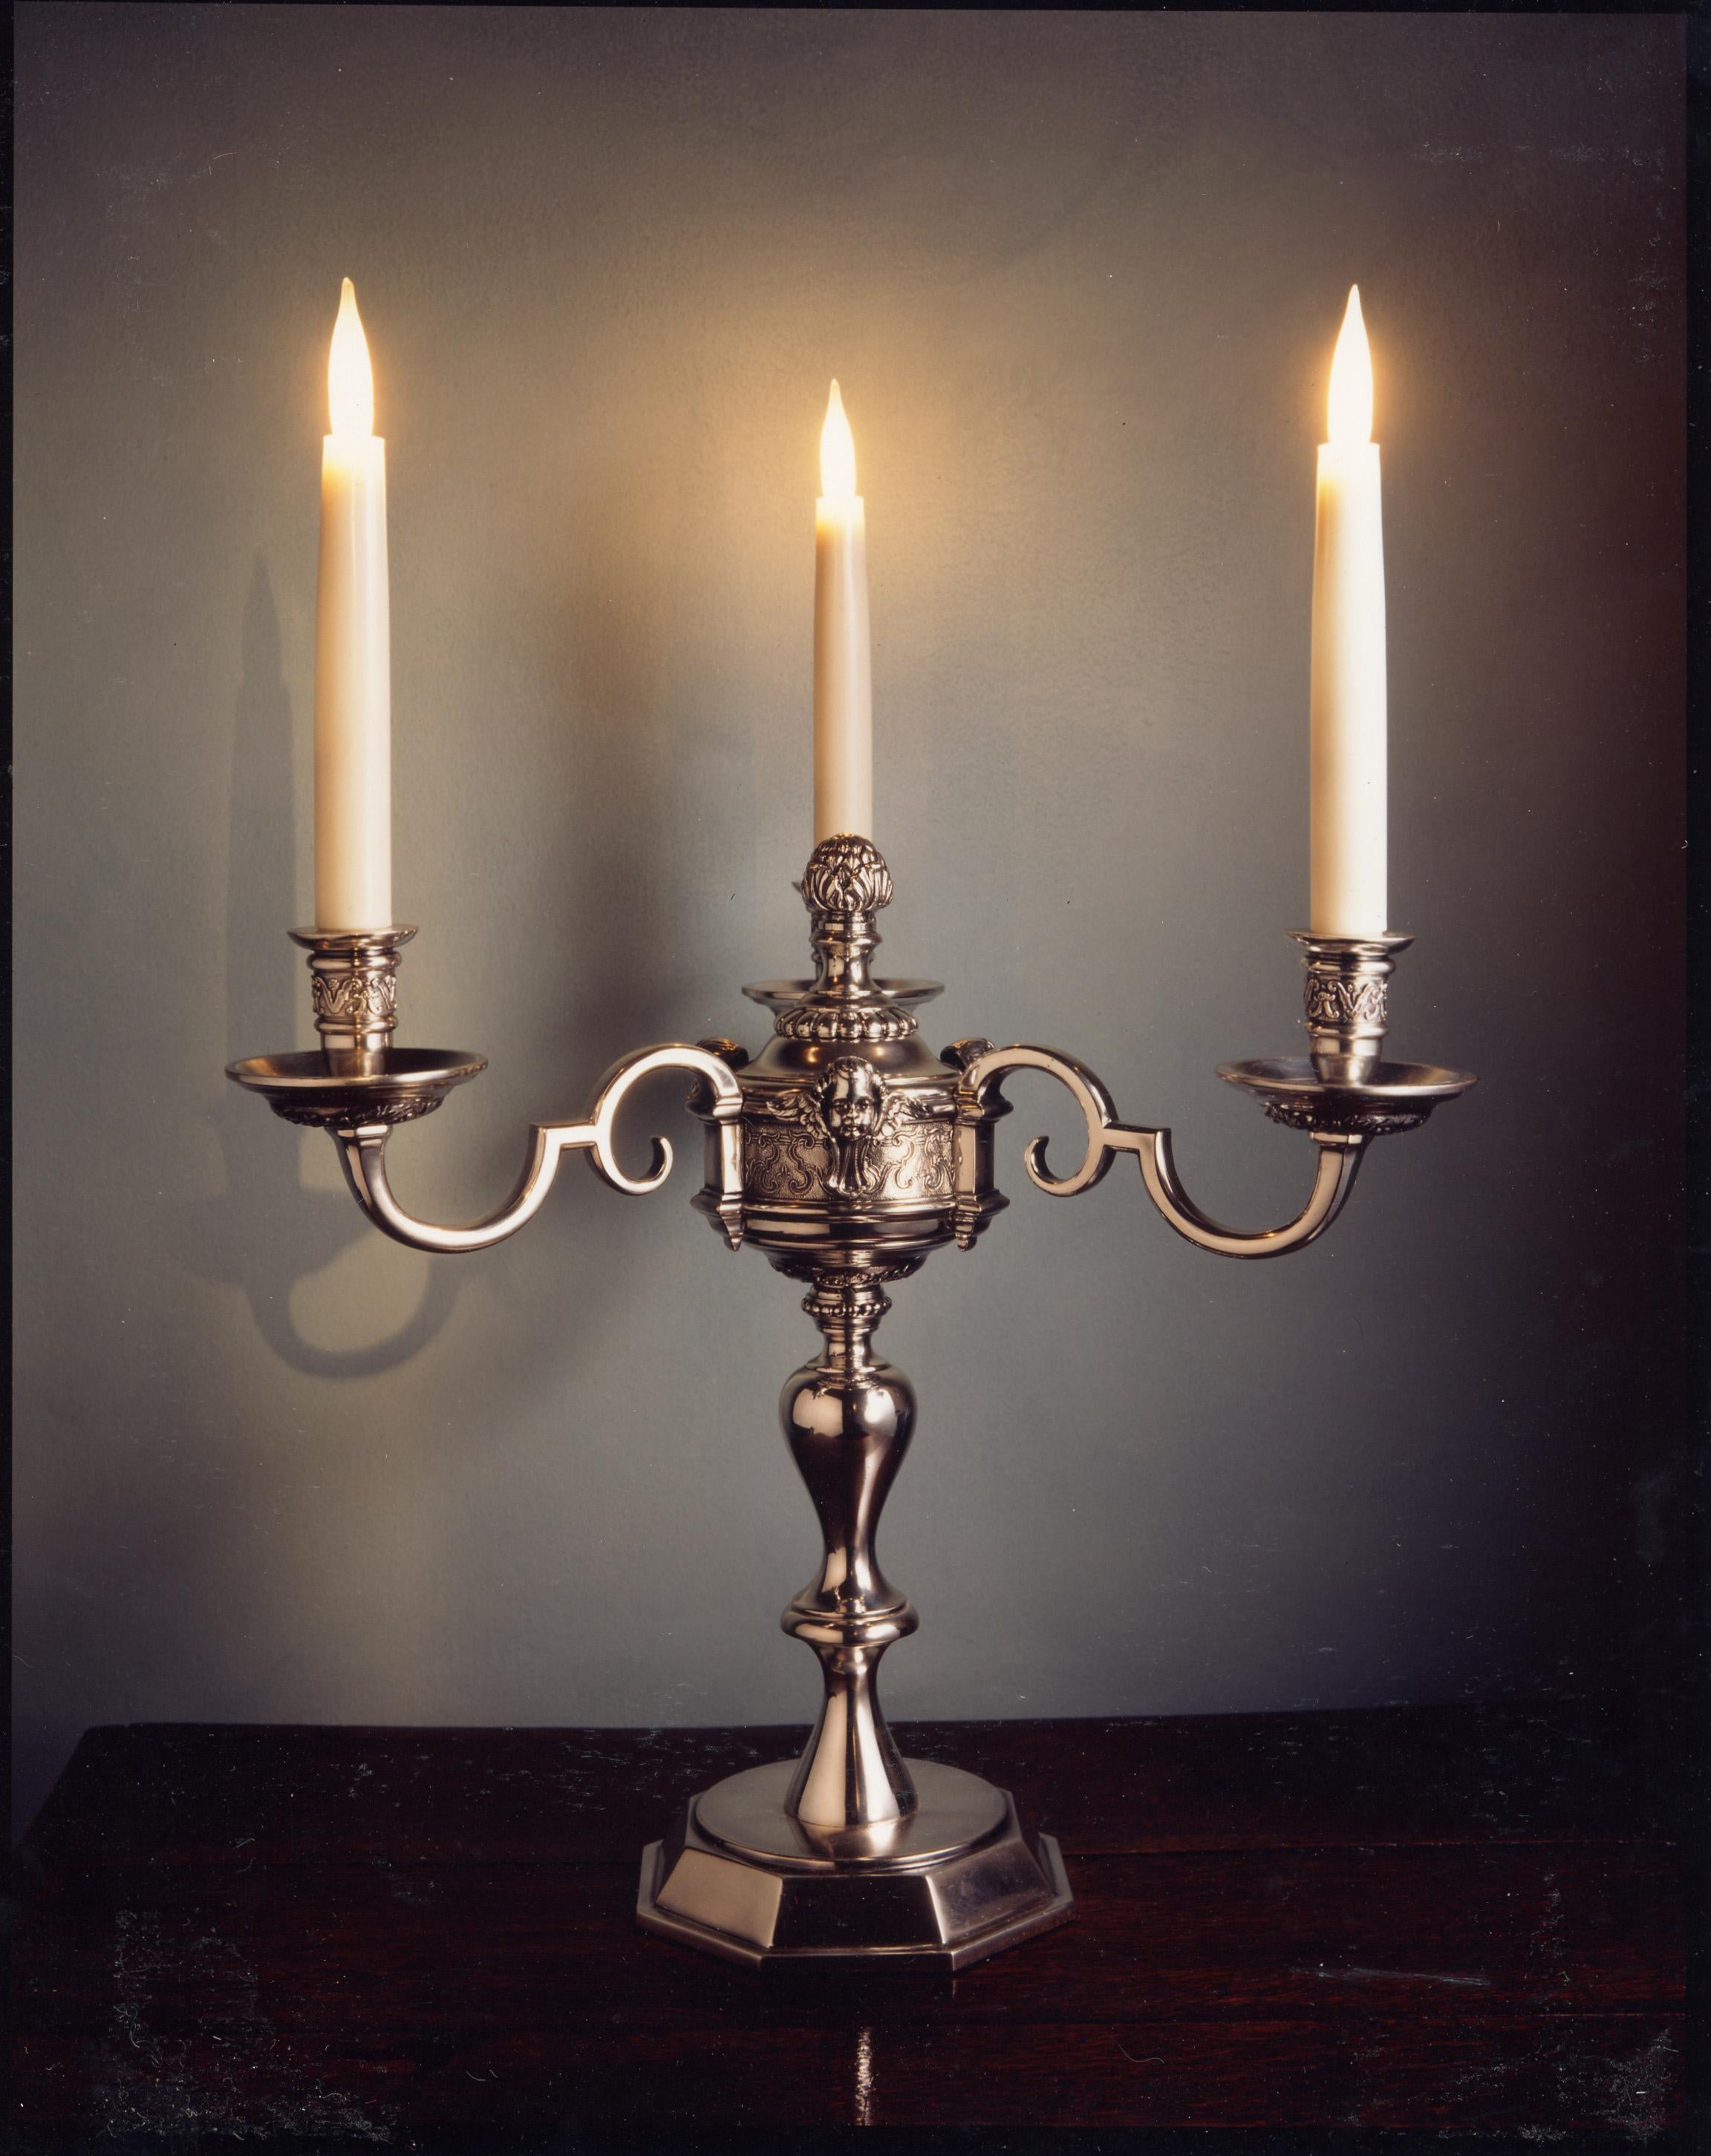 This was adapted from the silver chandelier hanging at Knole in Kent, exclusively for use in a conservation project at Hampton Court. It has an antique, silver plated finish. There is an old repair to a break in one of the arms on one candelabrum.